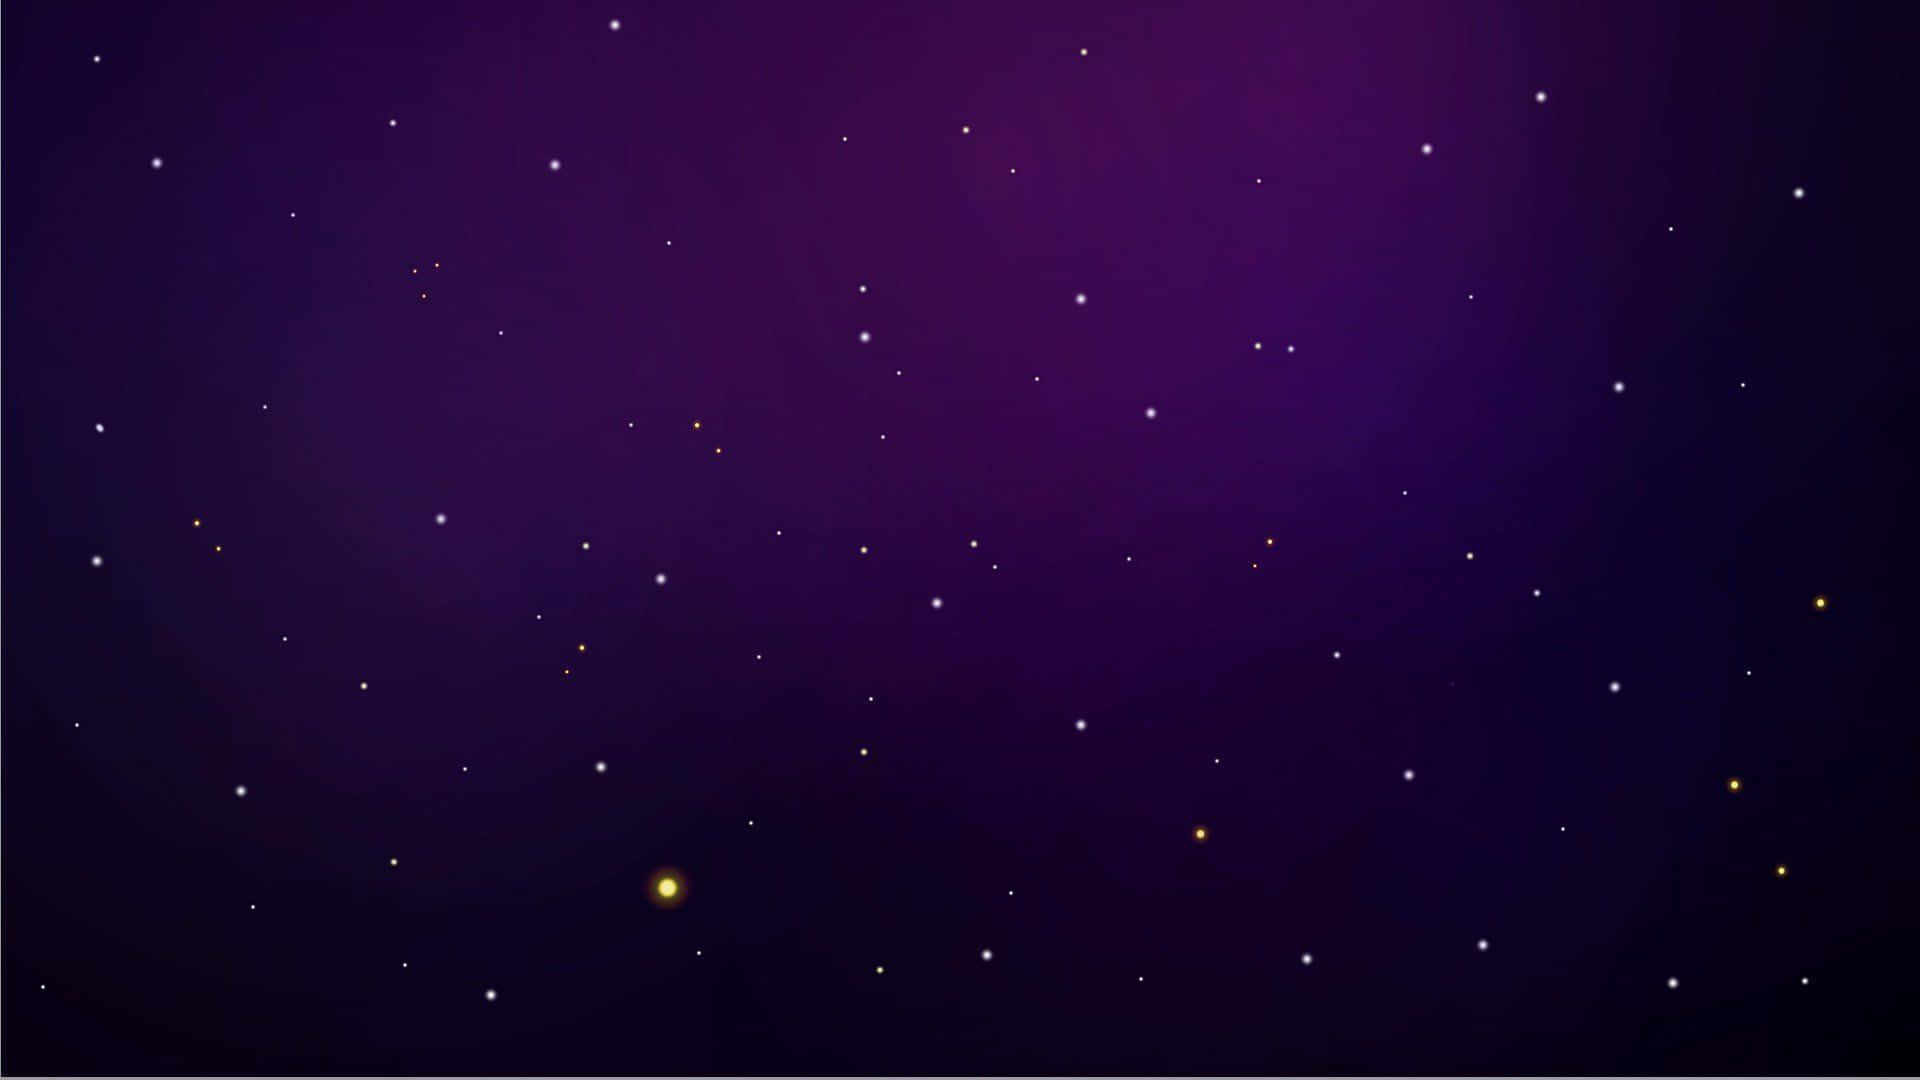 Explore the mysterious beauty of Purple Space!